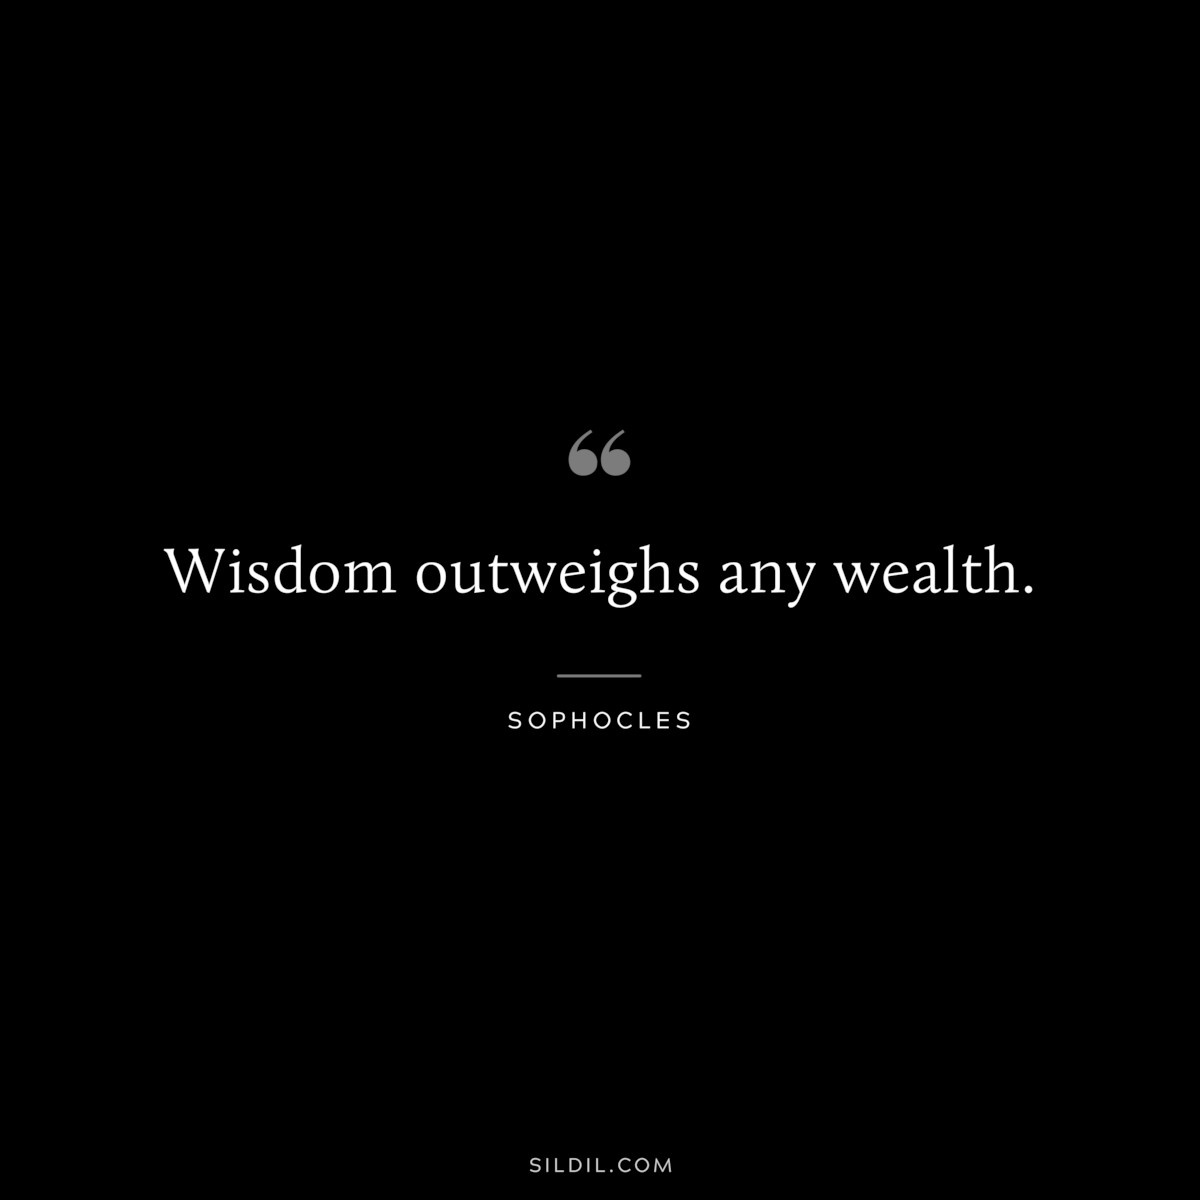 Wisdom outweighs any wealth. ― Sophocles